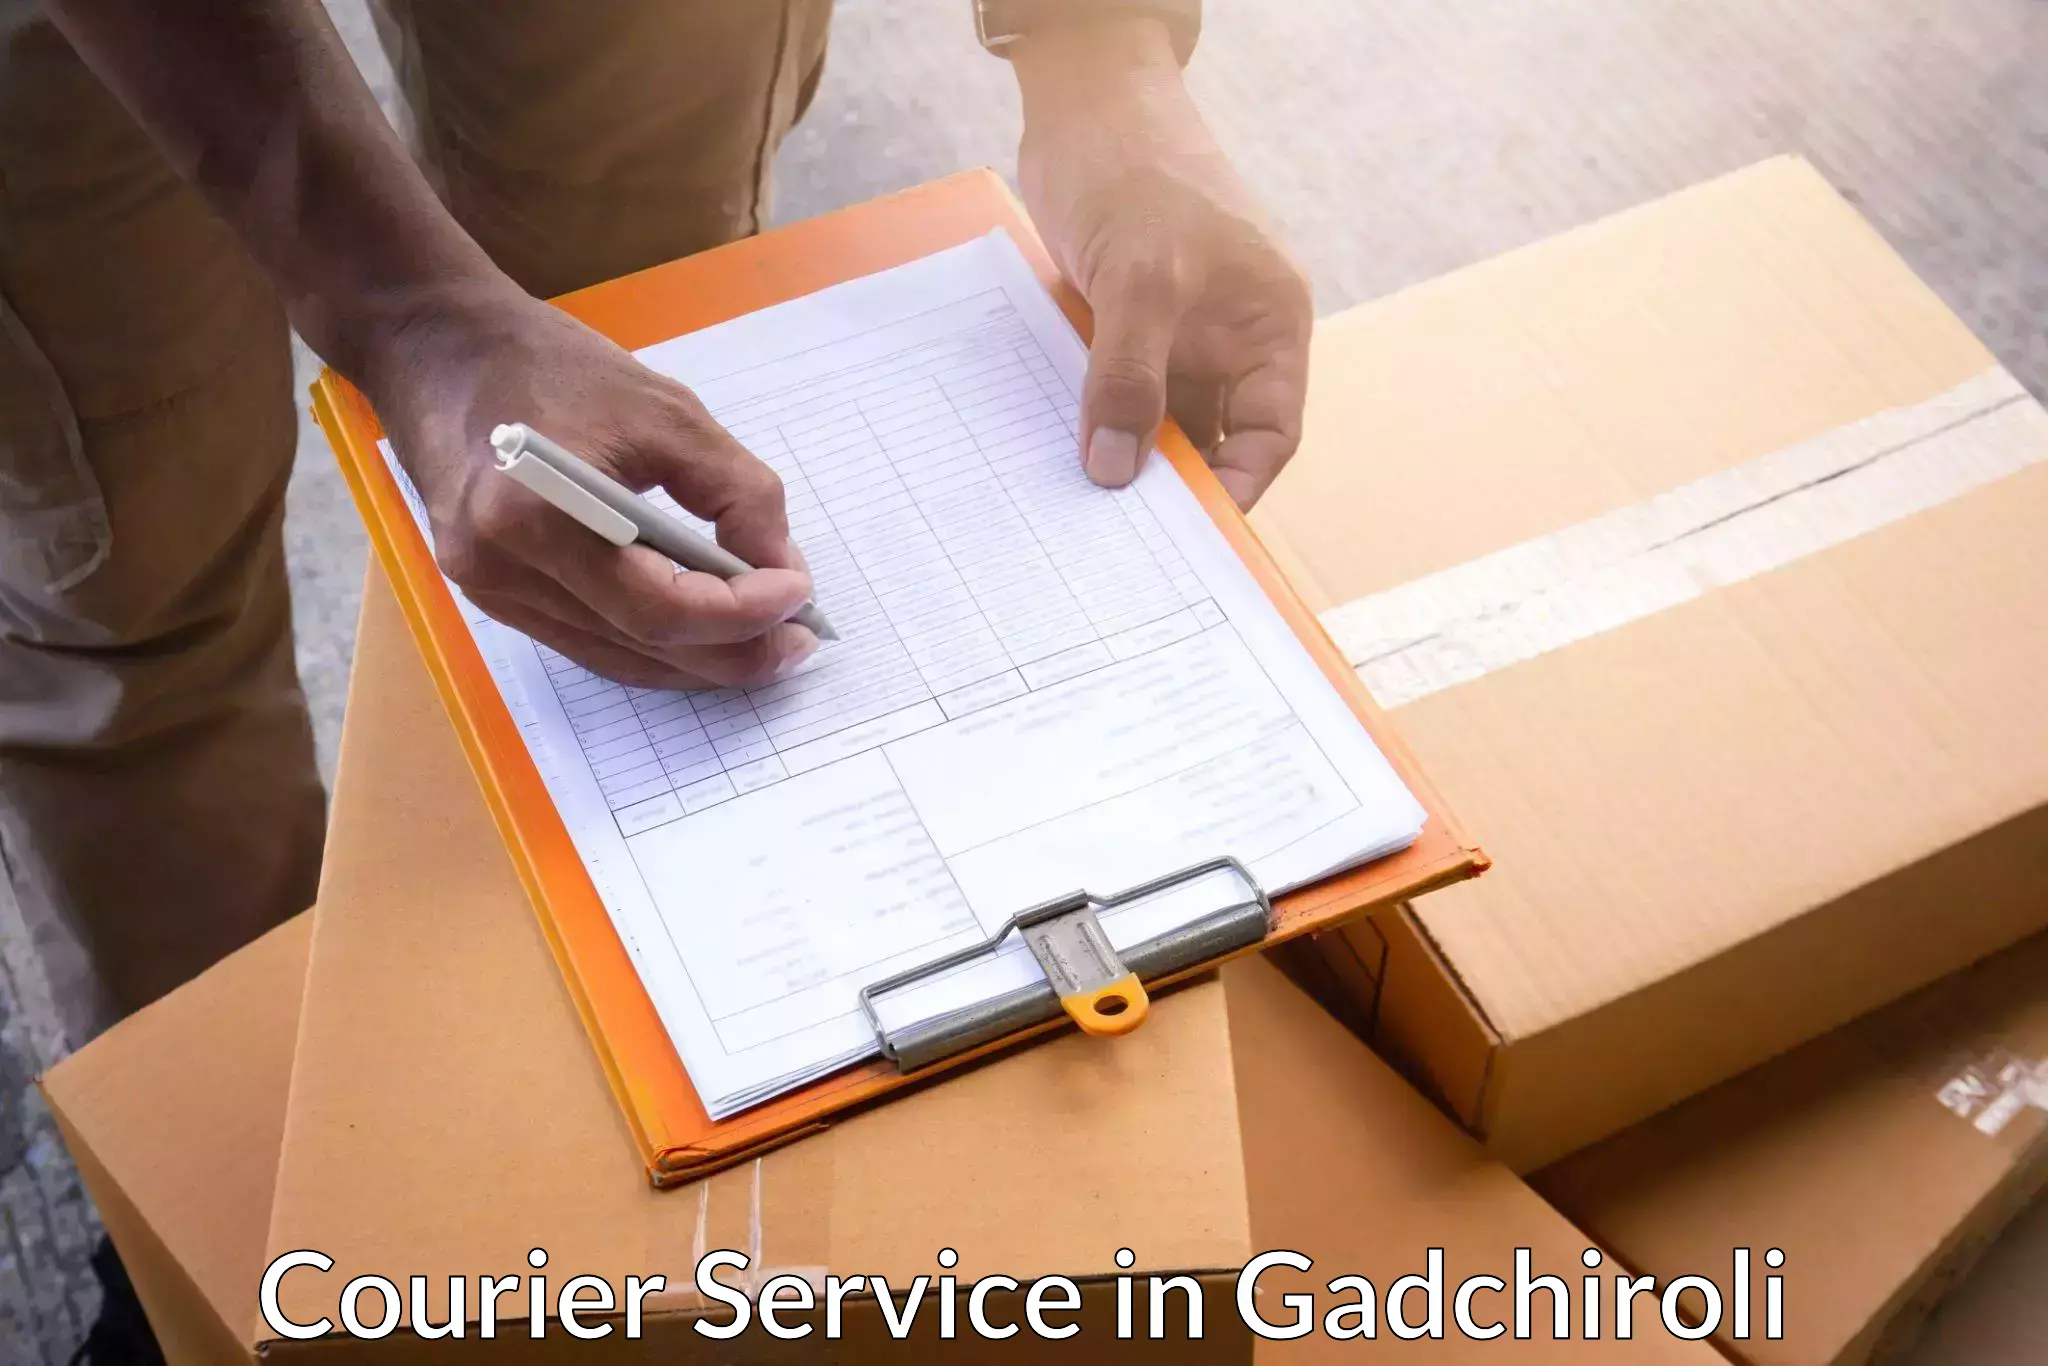 Same-day delivery options in Gadchiroli